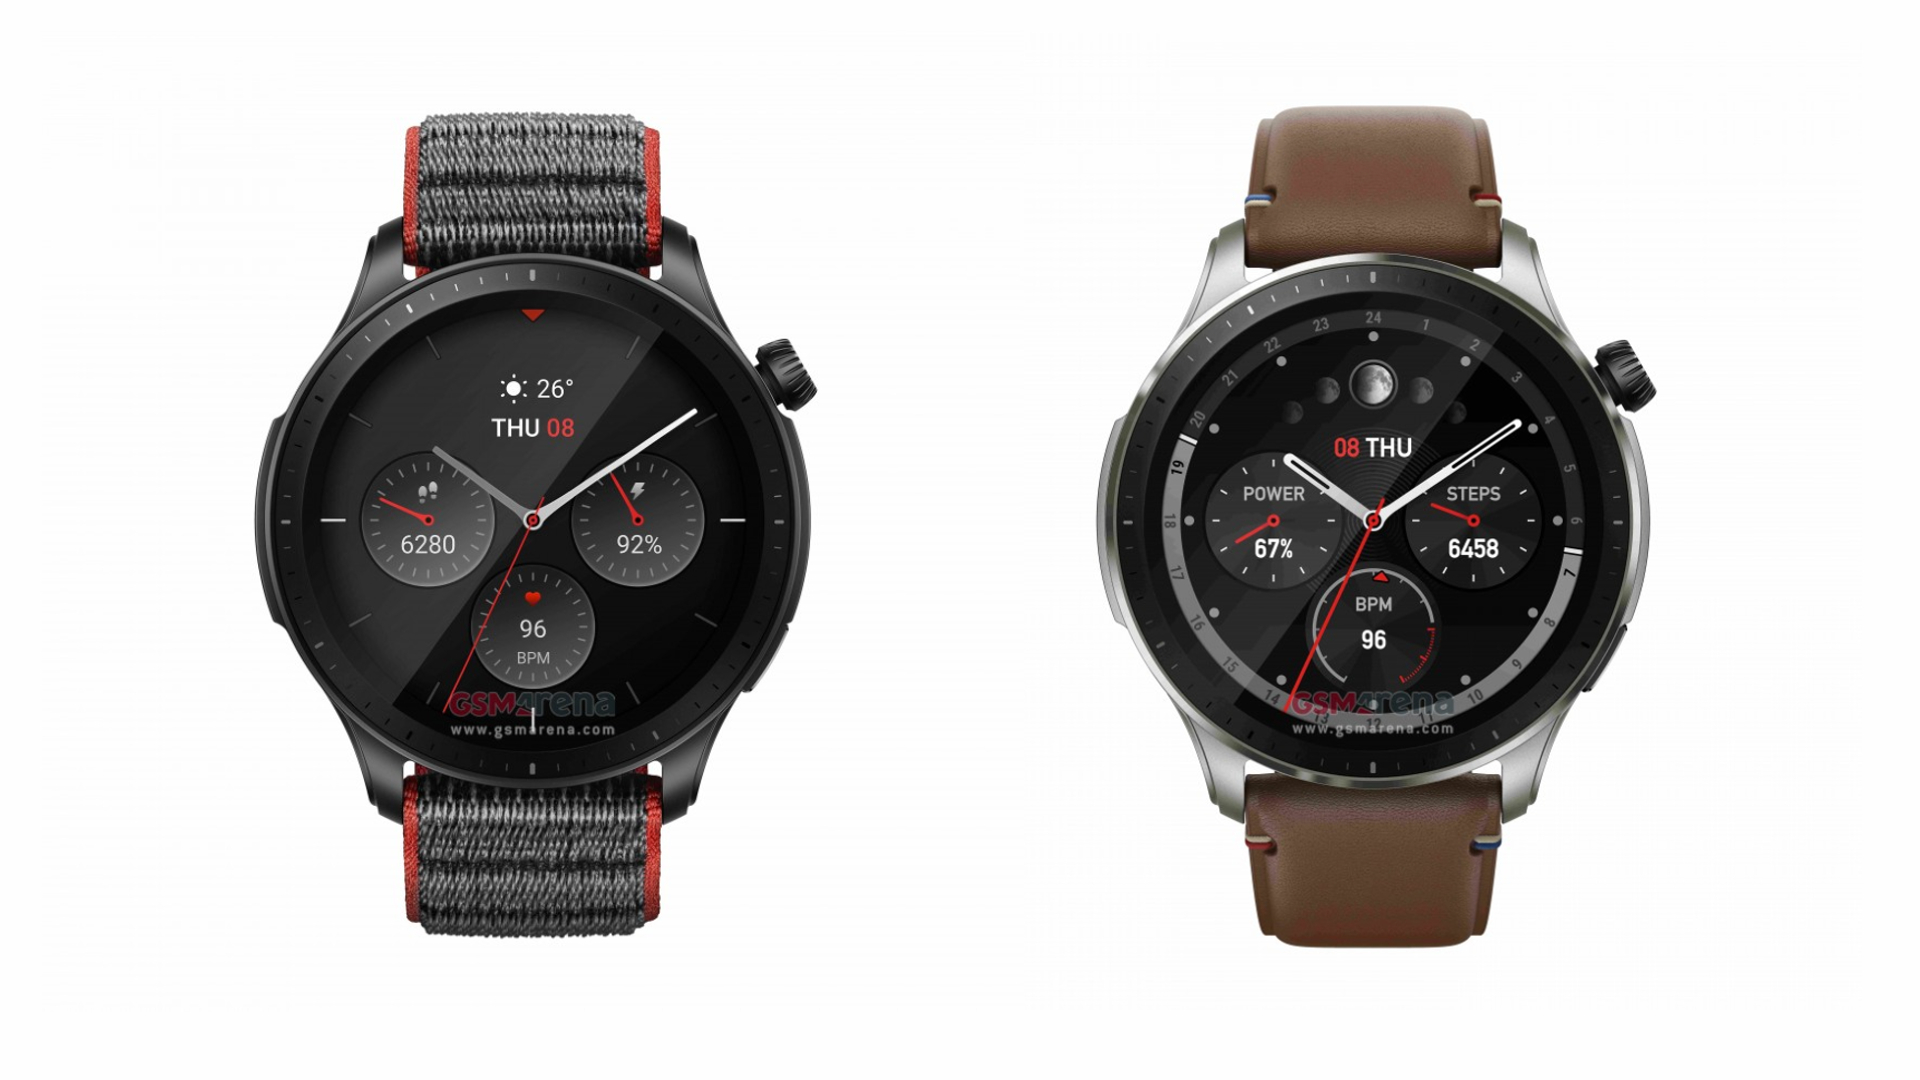 Amazfit: Amazfit GTR 3, GTS 3 and GTR 3 Pro smartwatches announced, will  launch in India soon - Times of India